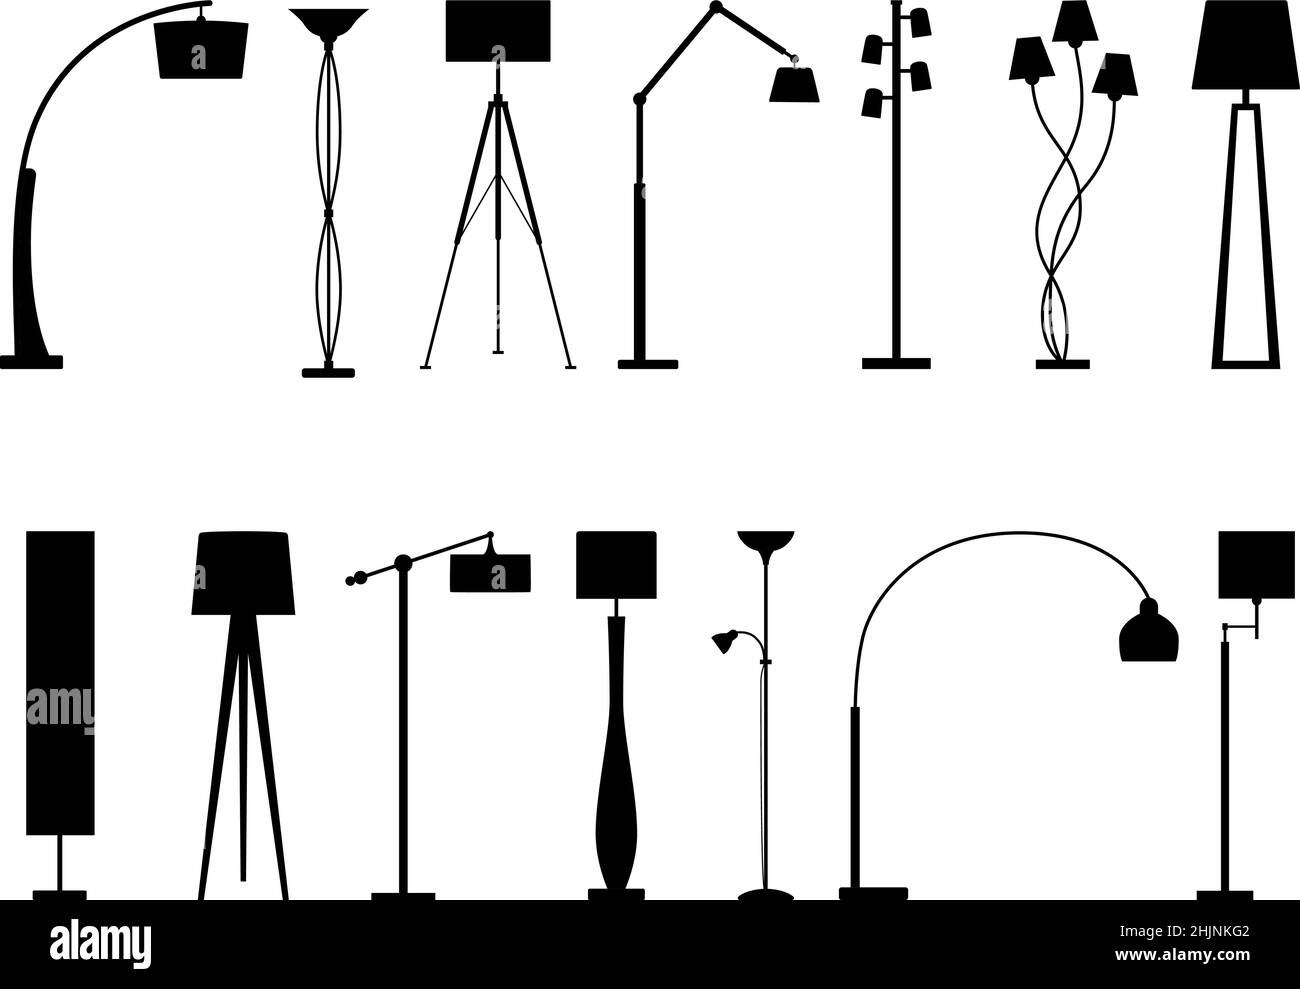 Set Of Silhouettes Of Floor Lamps Vector Illustration Stock Vector